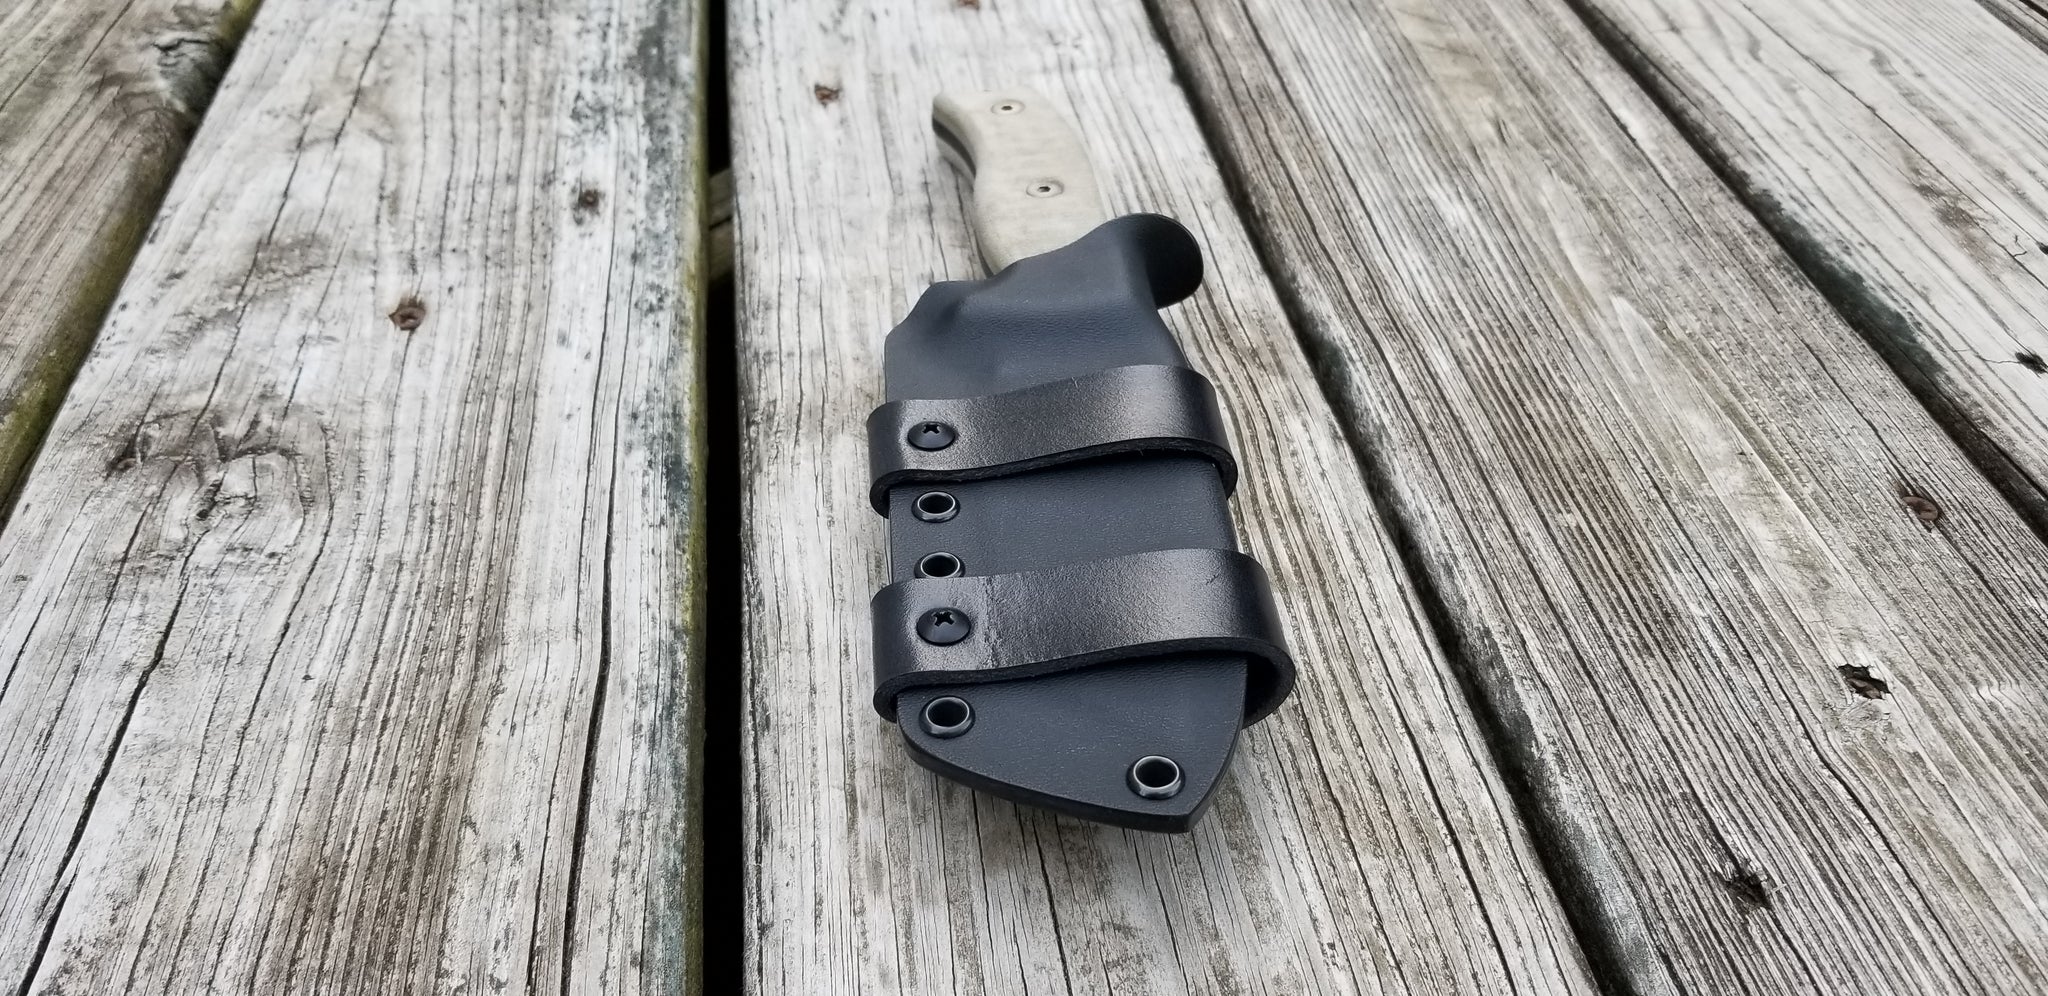 Ontario RAT-5 Taco Style kydex sheath, pair of leather/Double snap scout carry loops